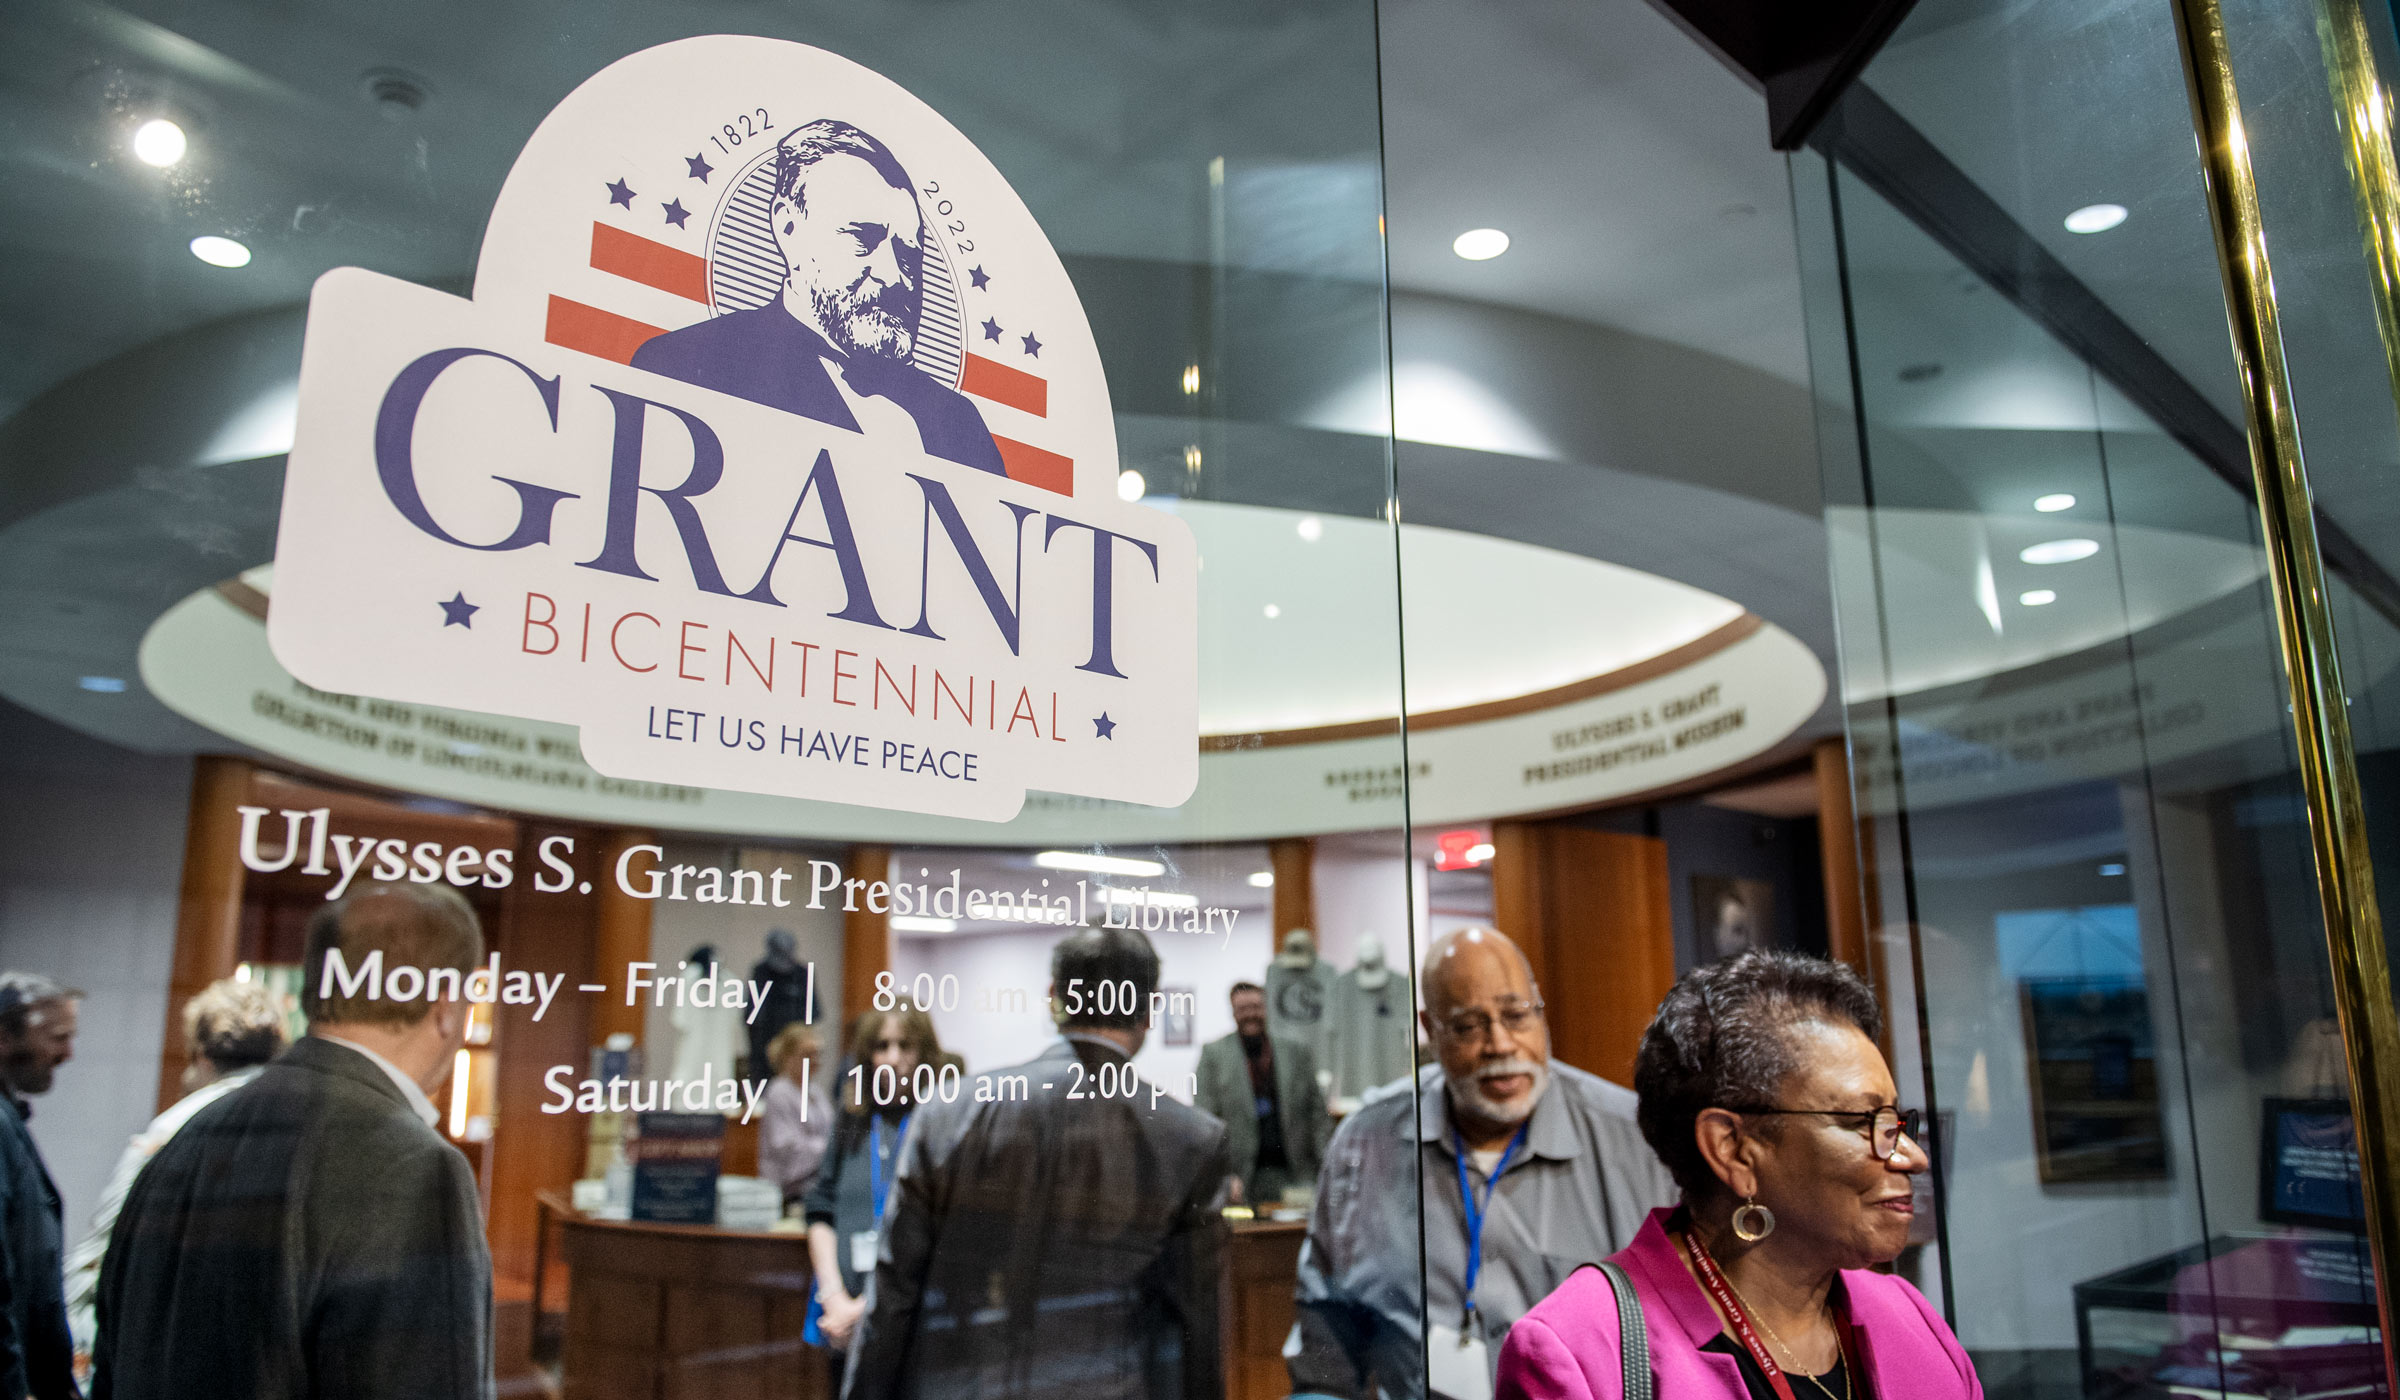 With views to the busy lobby of the Grant Presidential Library beyond, a sticker on the glass doors reads &quot;GRANT Bicentennial - Let Us Have Peace.&quot;